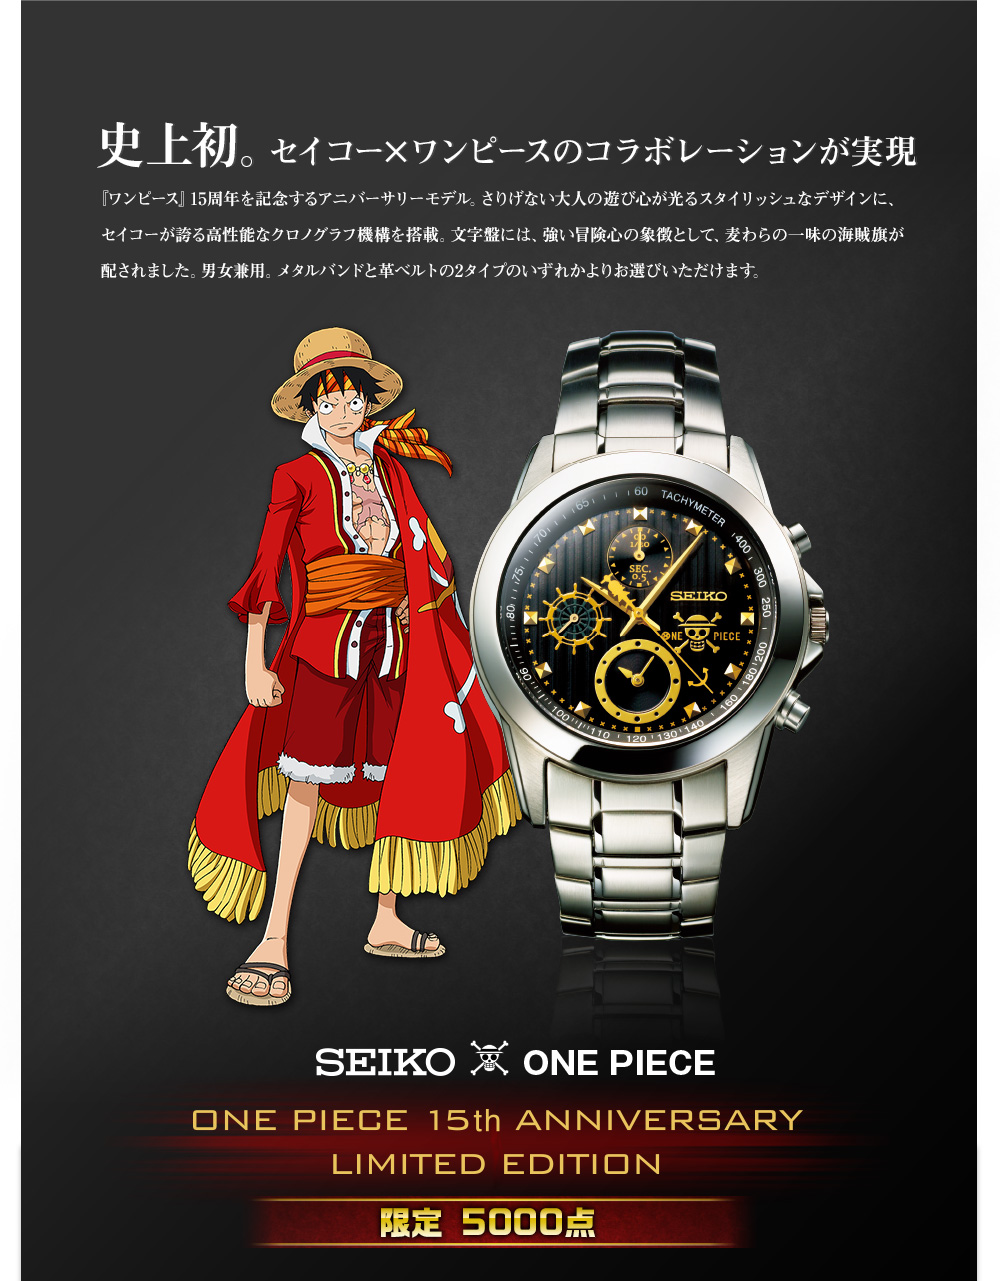 Seiko x One Piece 15th Anniversary Limited Wristwatch Announced - Haruhichan